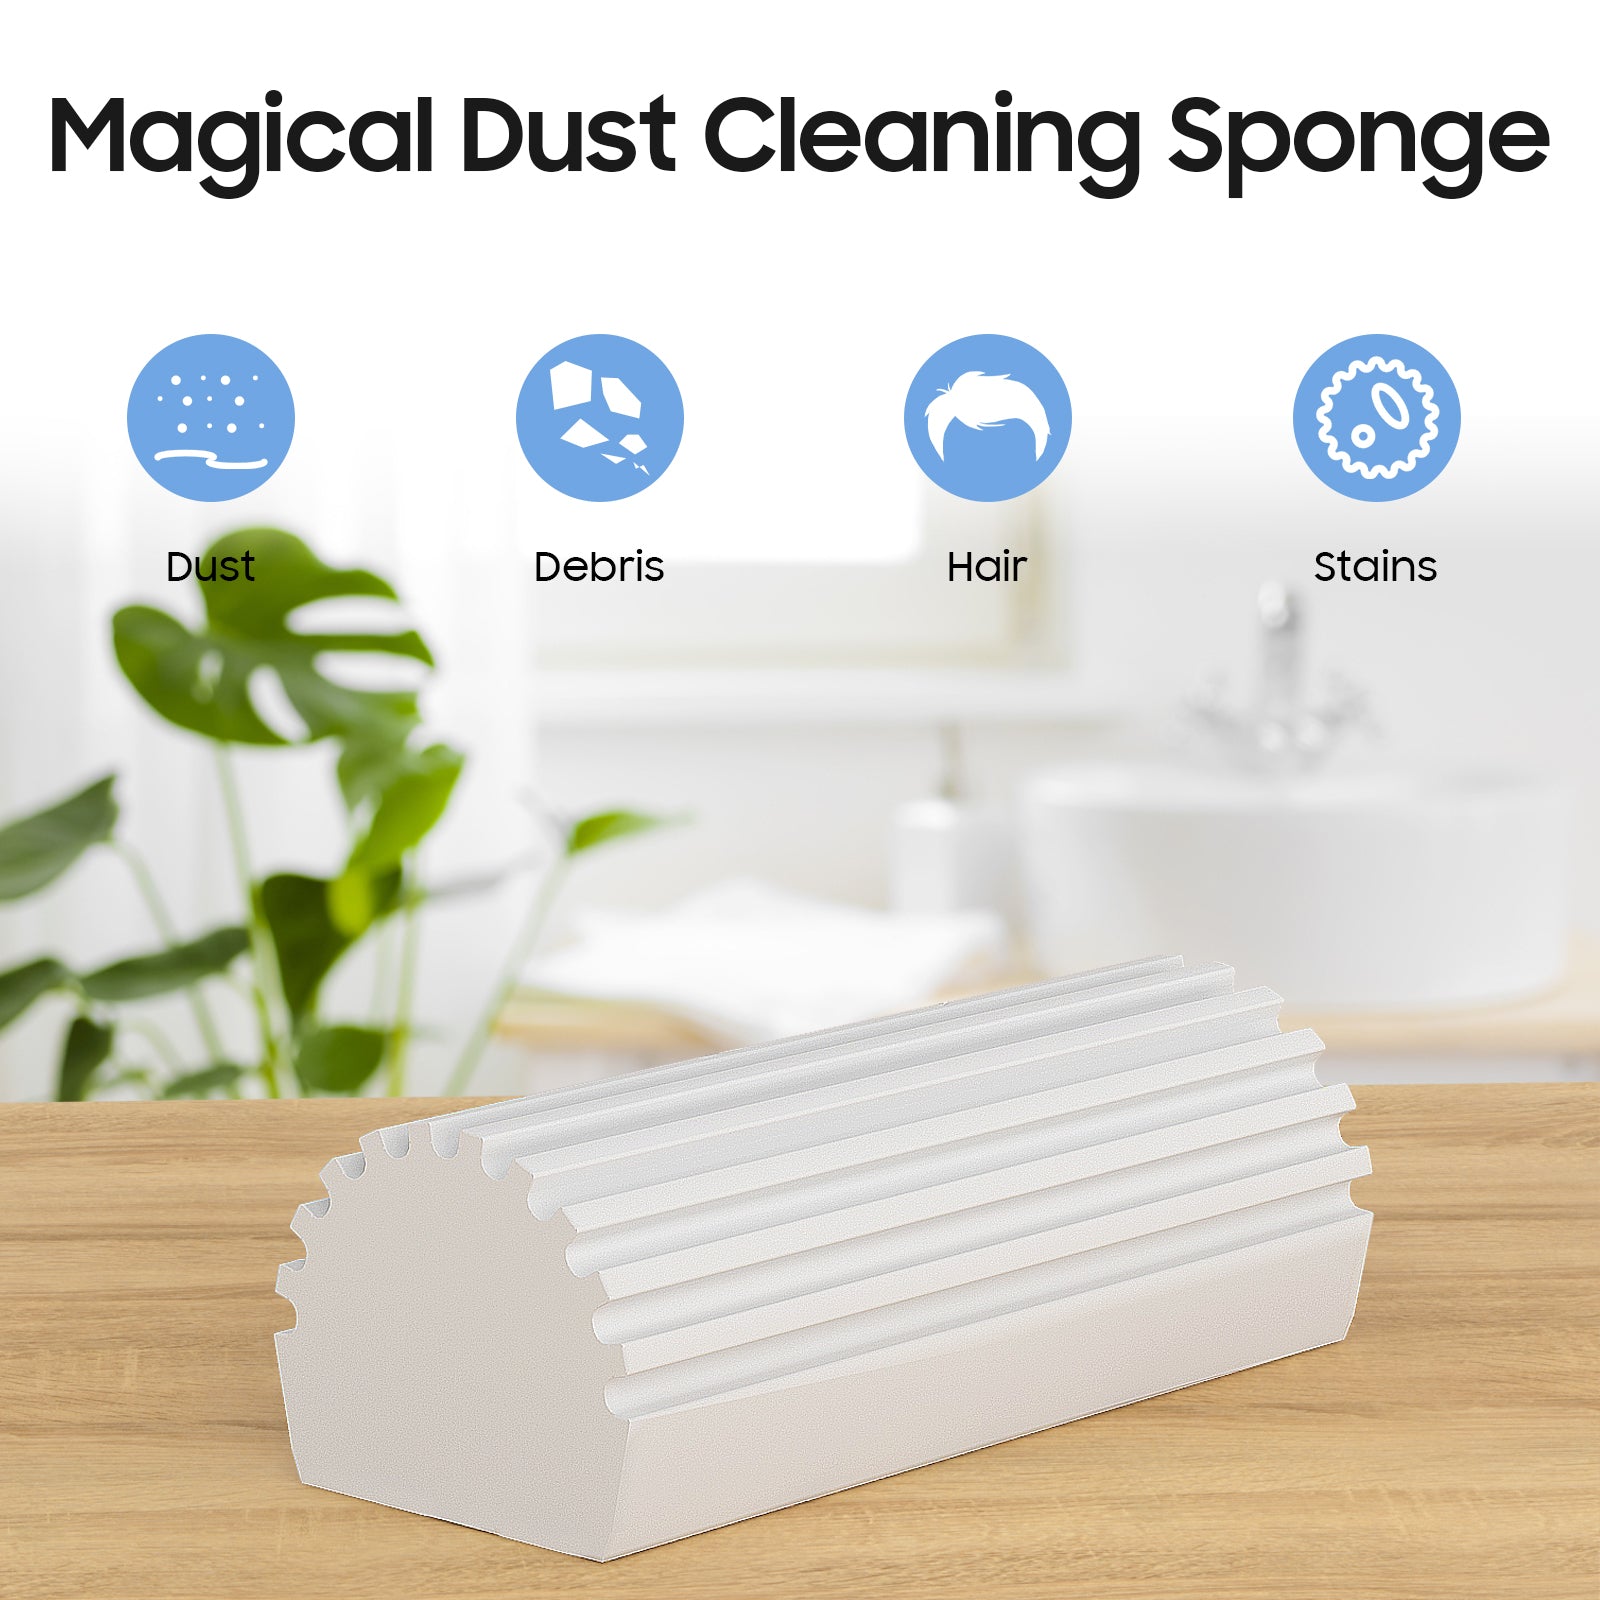 Cleaning Brushes - Shop for Cleaning Accessories & Sponges